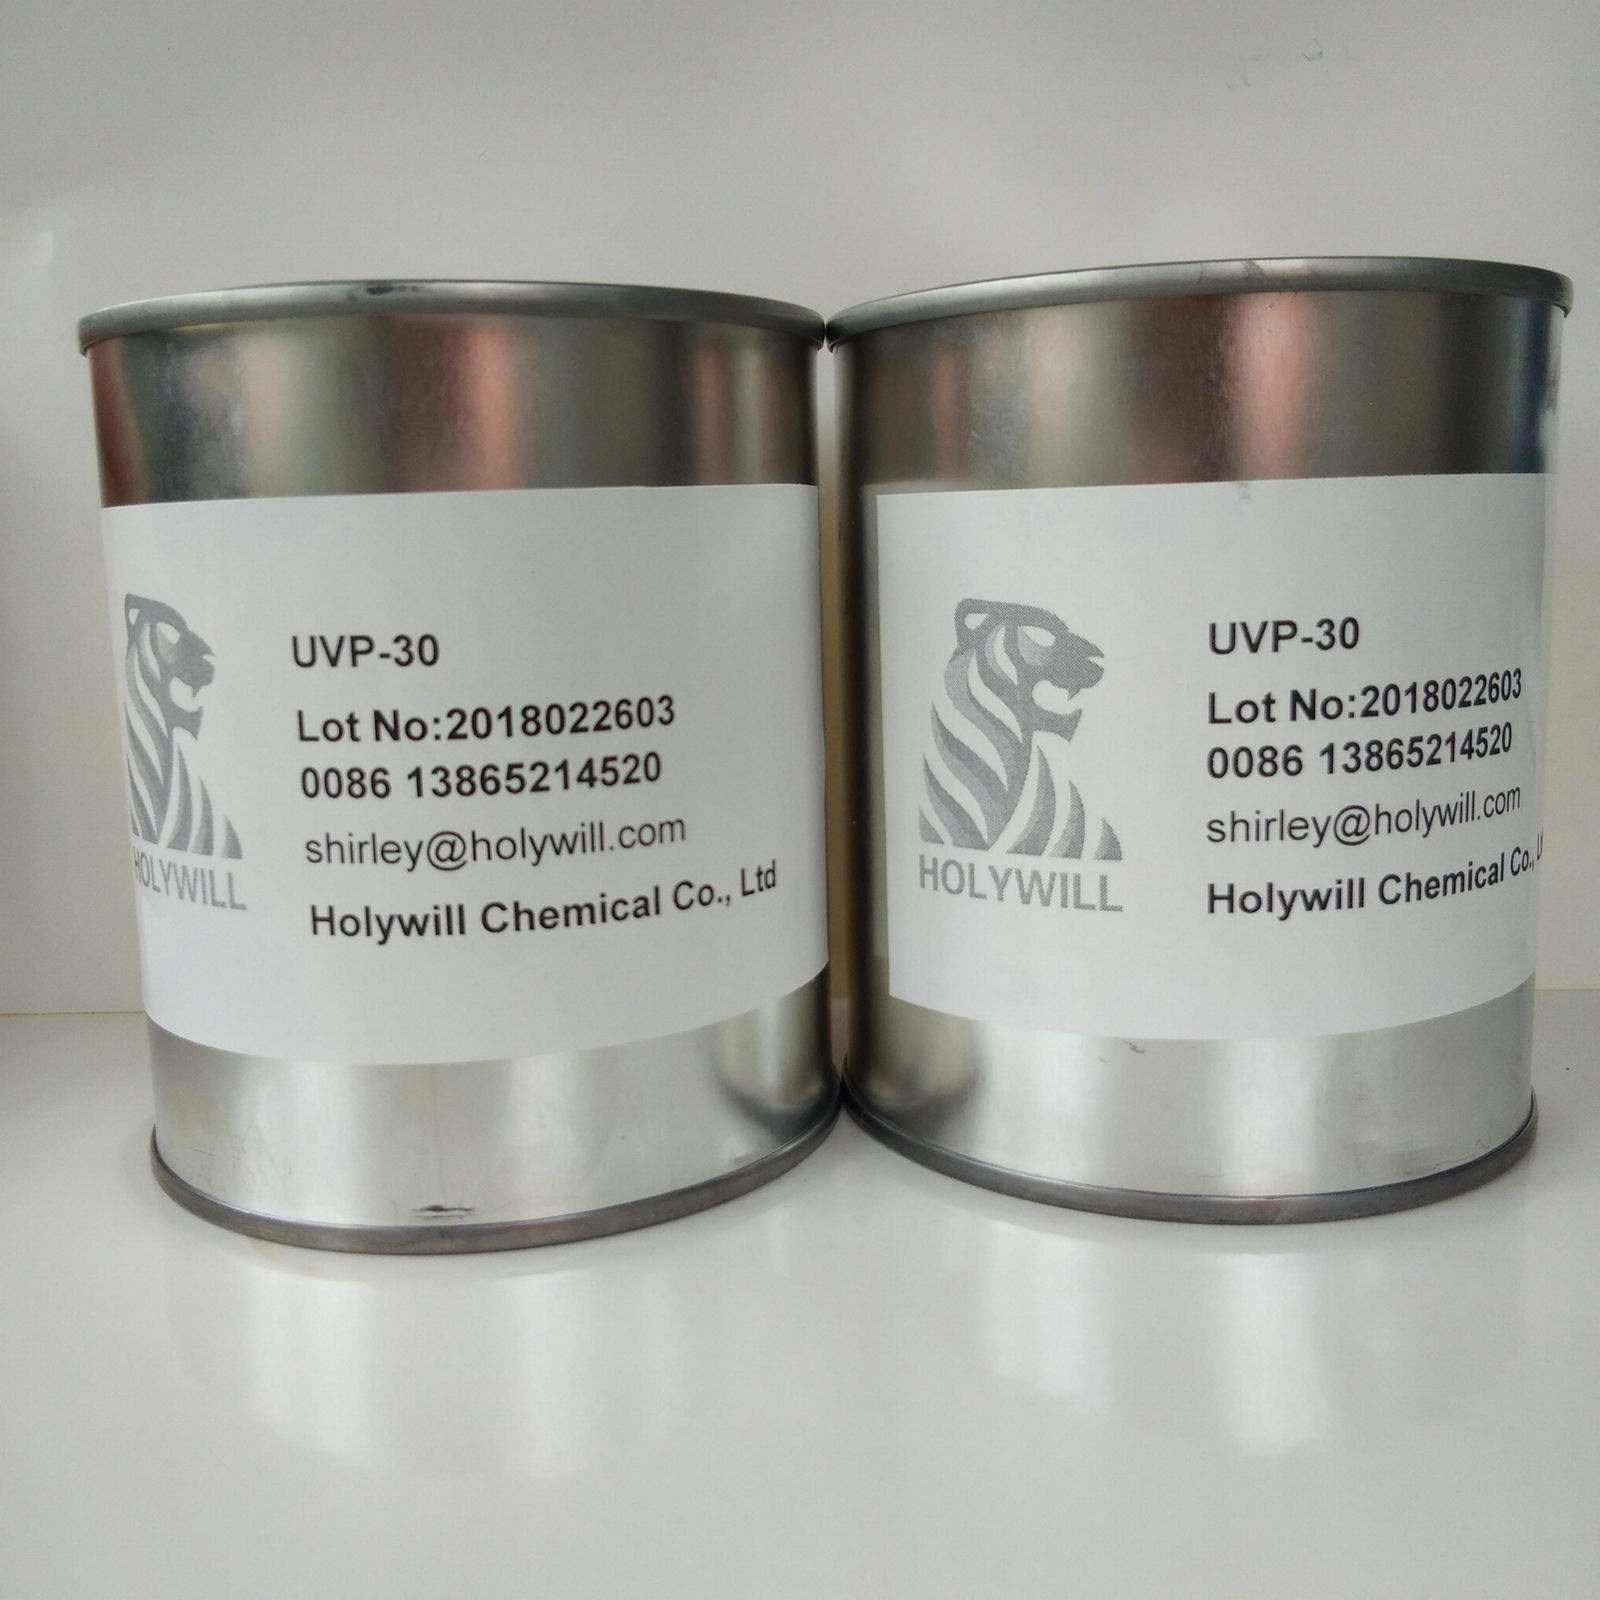 UV Curable Ink Resin Compete With Ebecryl 859 Of Allnex UVP30 4